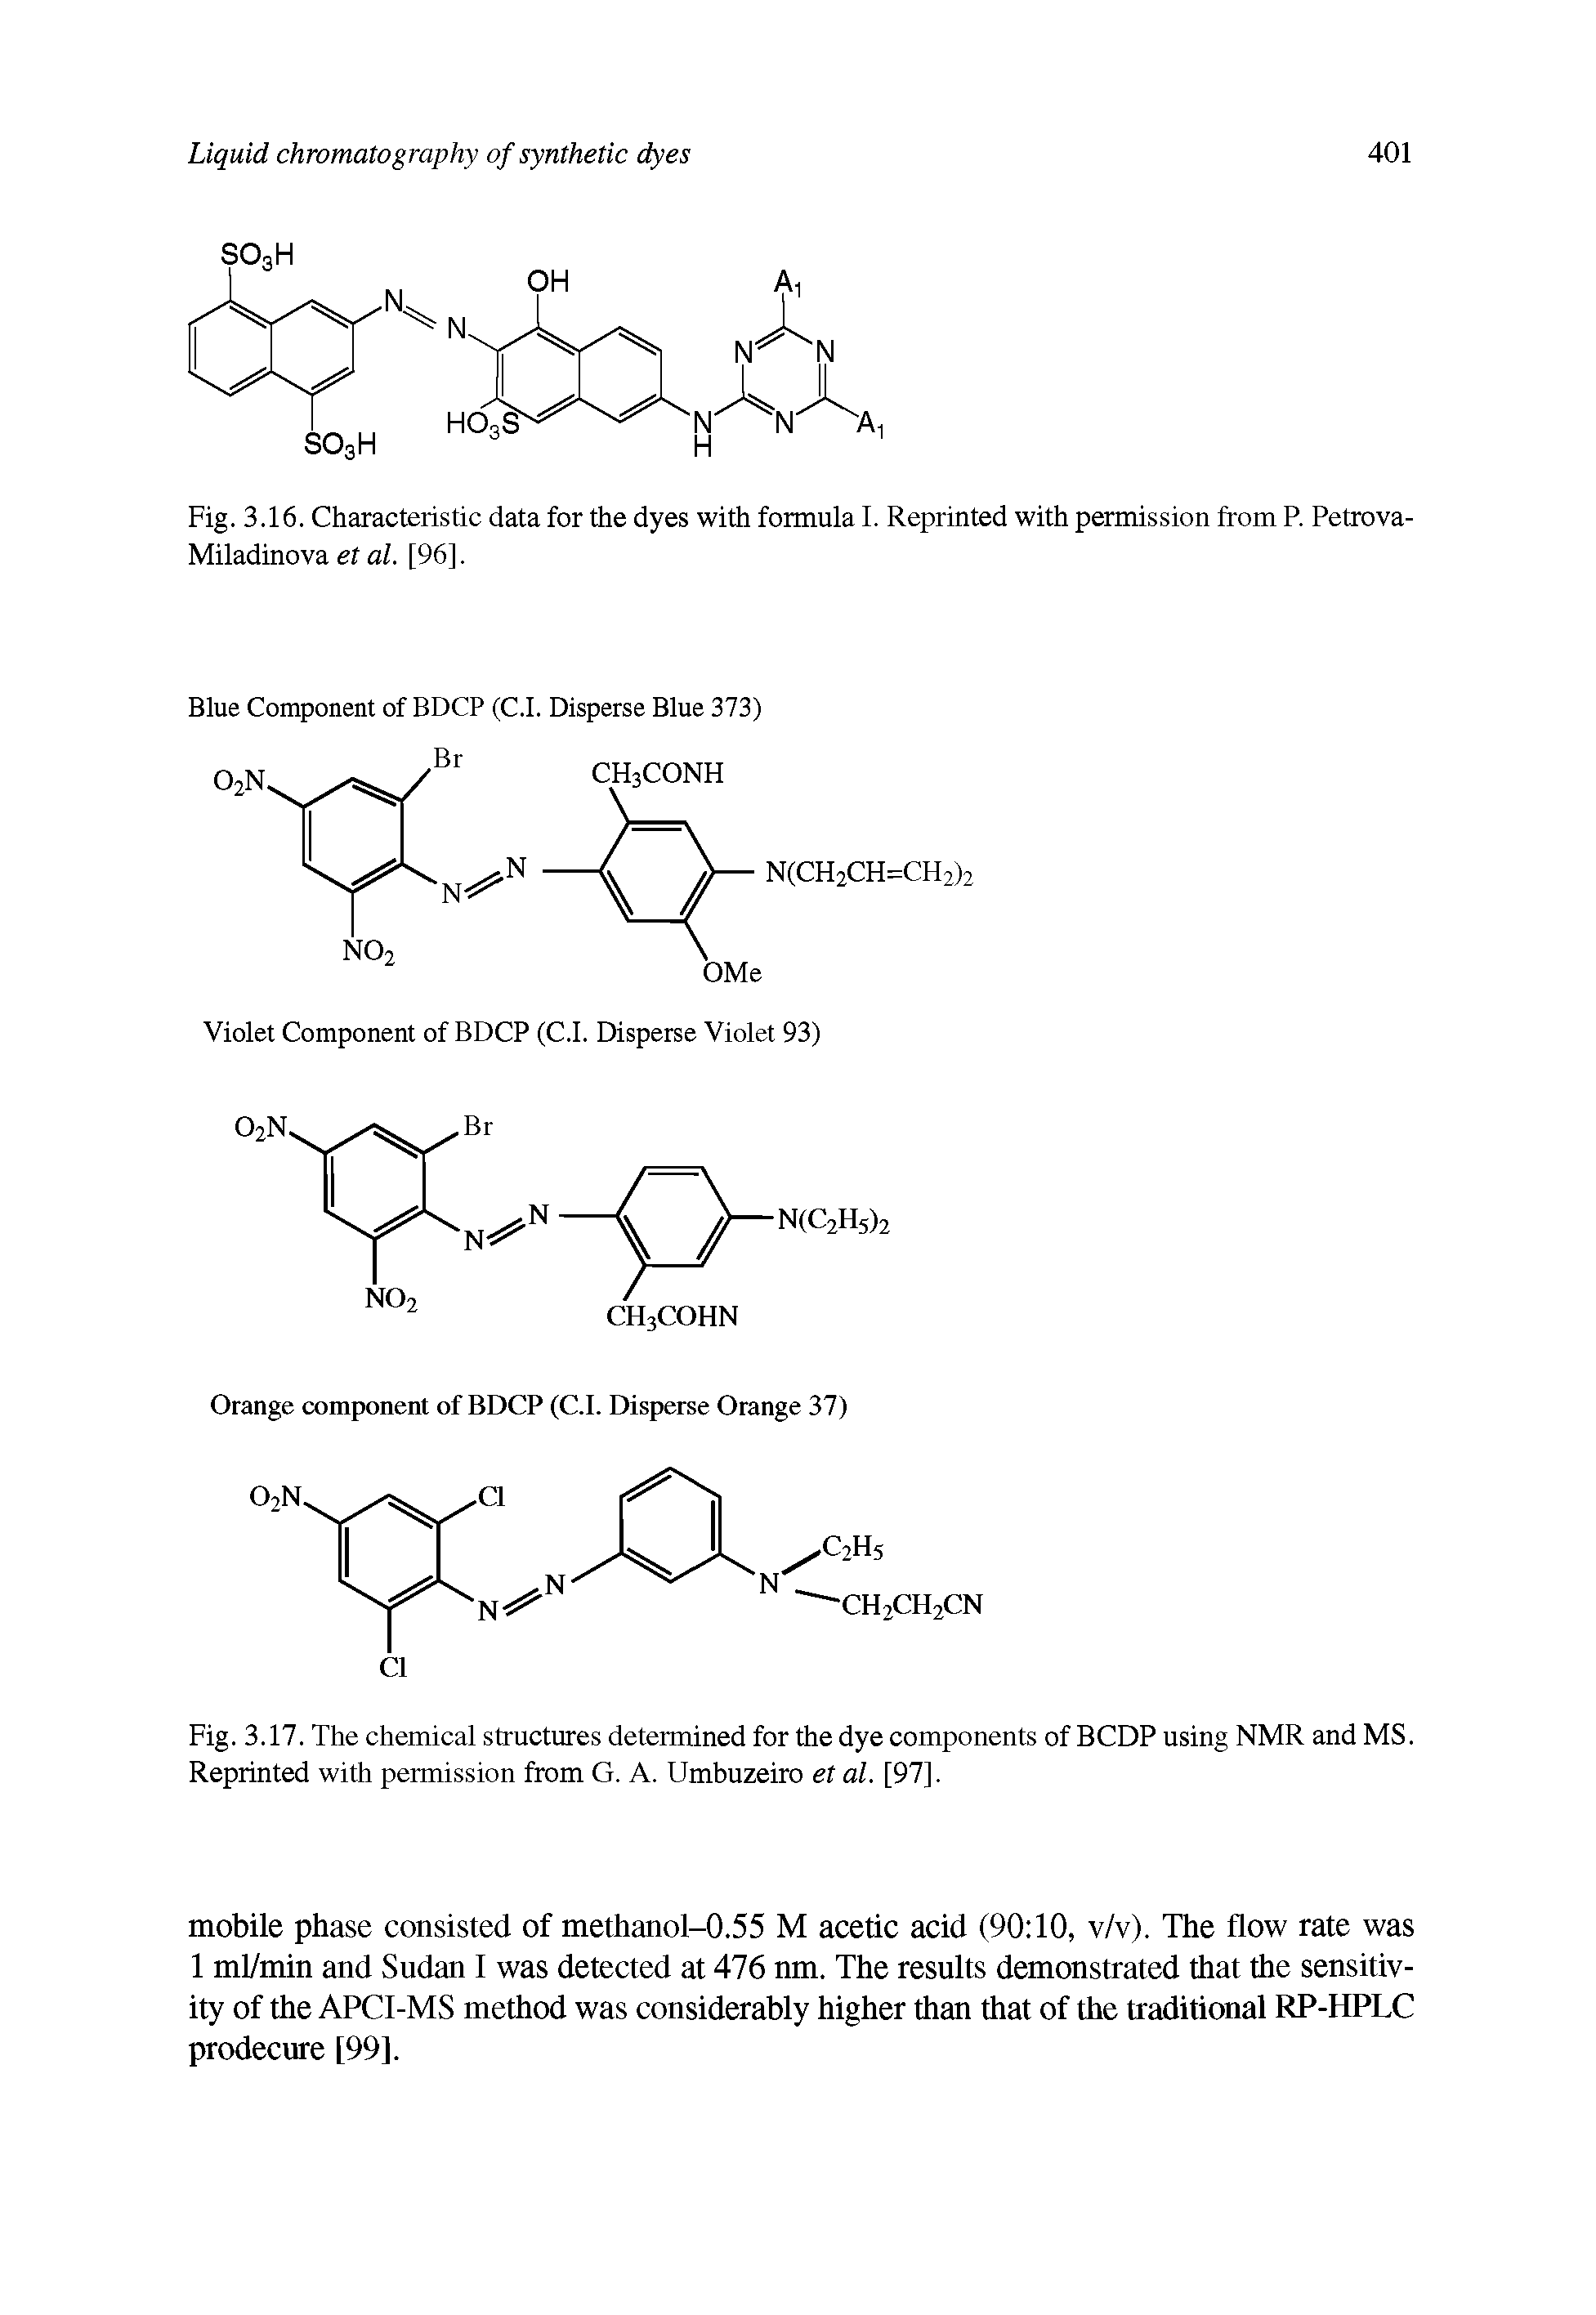 Fig. 3.17. The chemical structures determined for the dye components of BCDP using NMR and MS. Reprinted with permission from G. A. Umbuzeiro et al. [97).